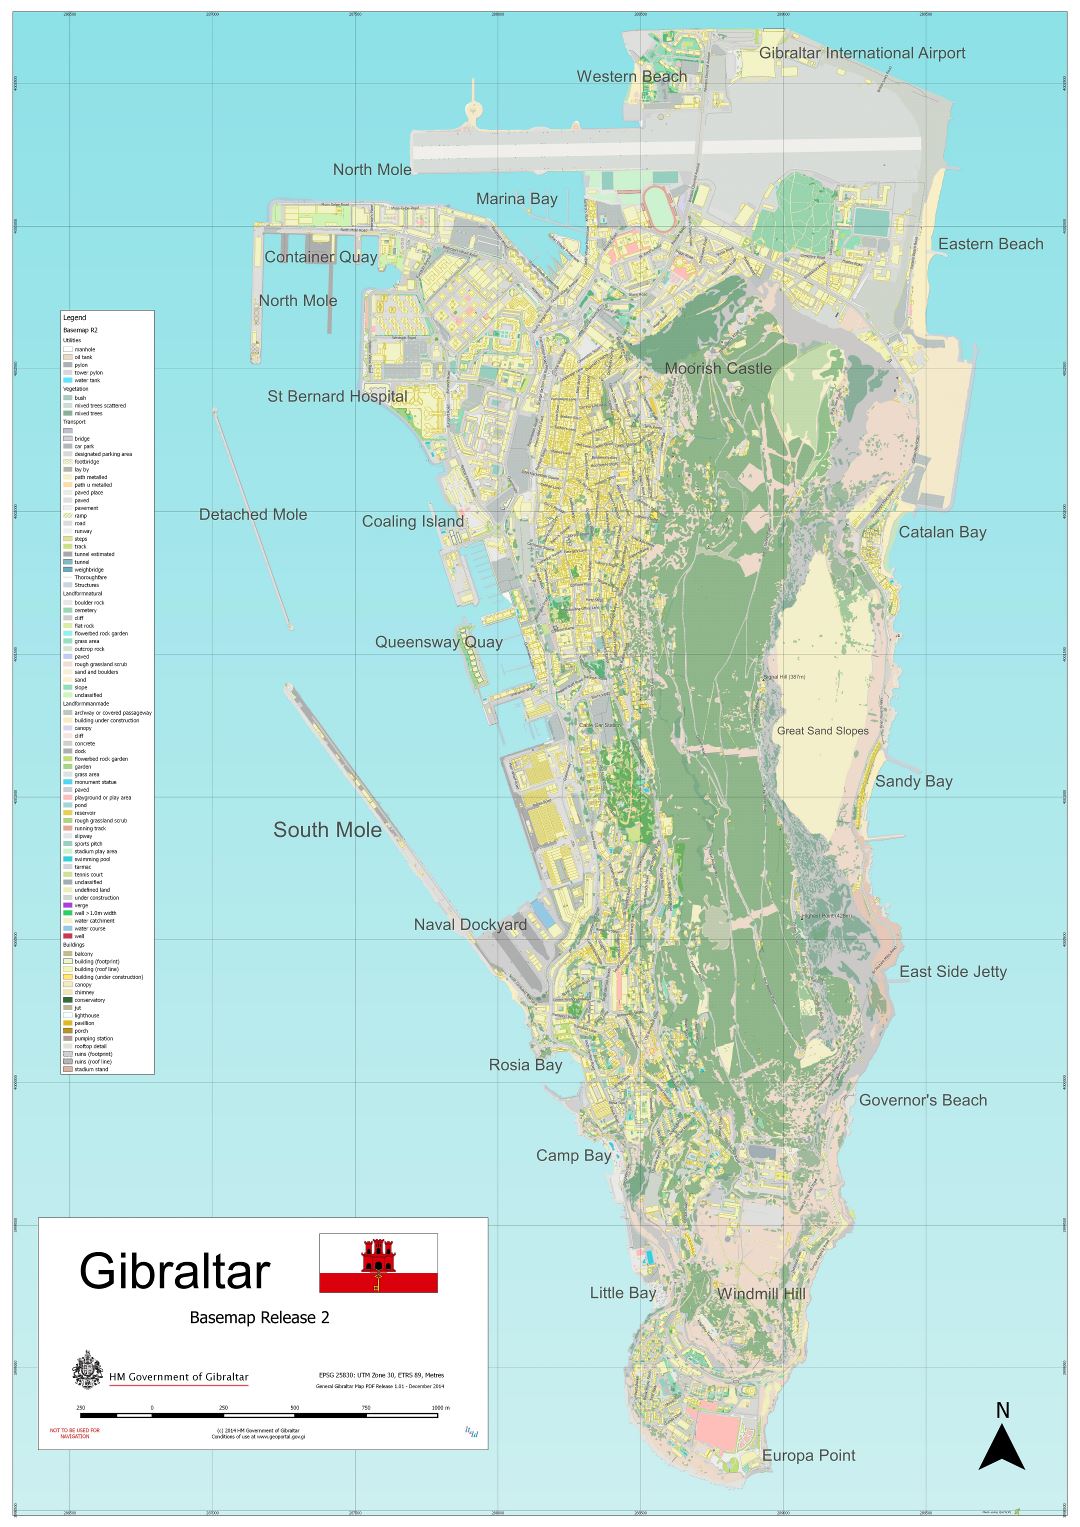 Large scale full map of Gibraltar